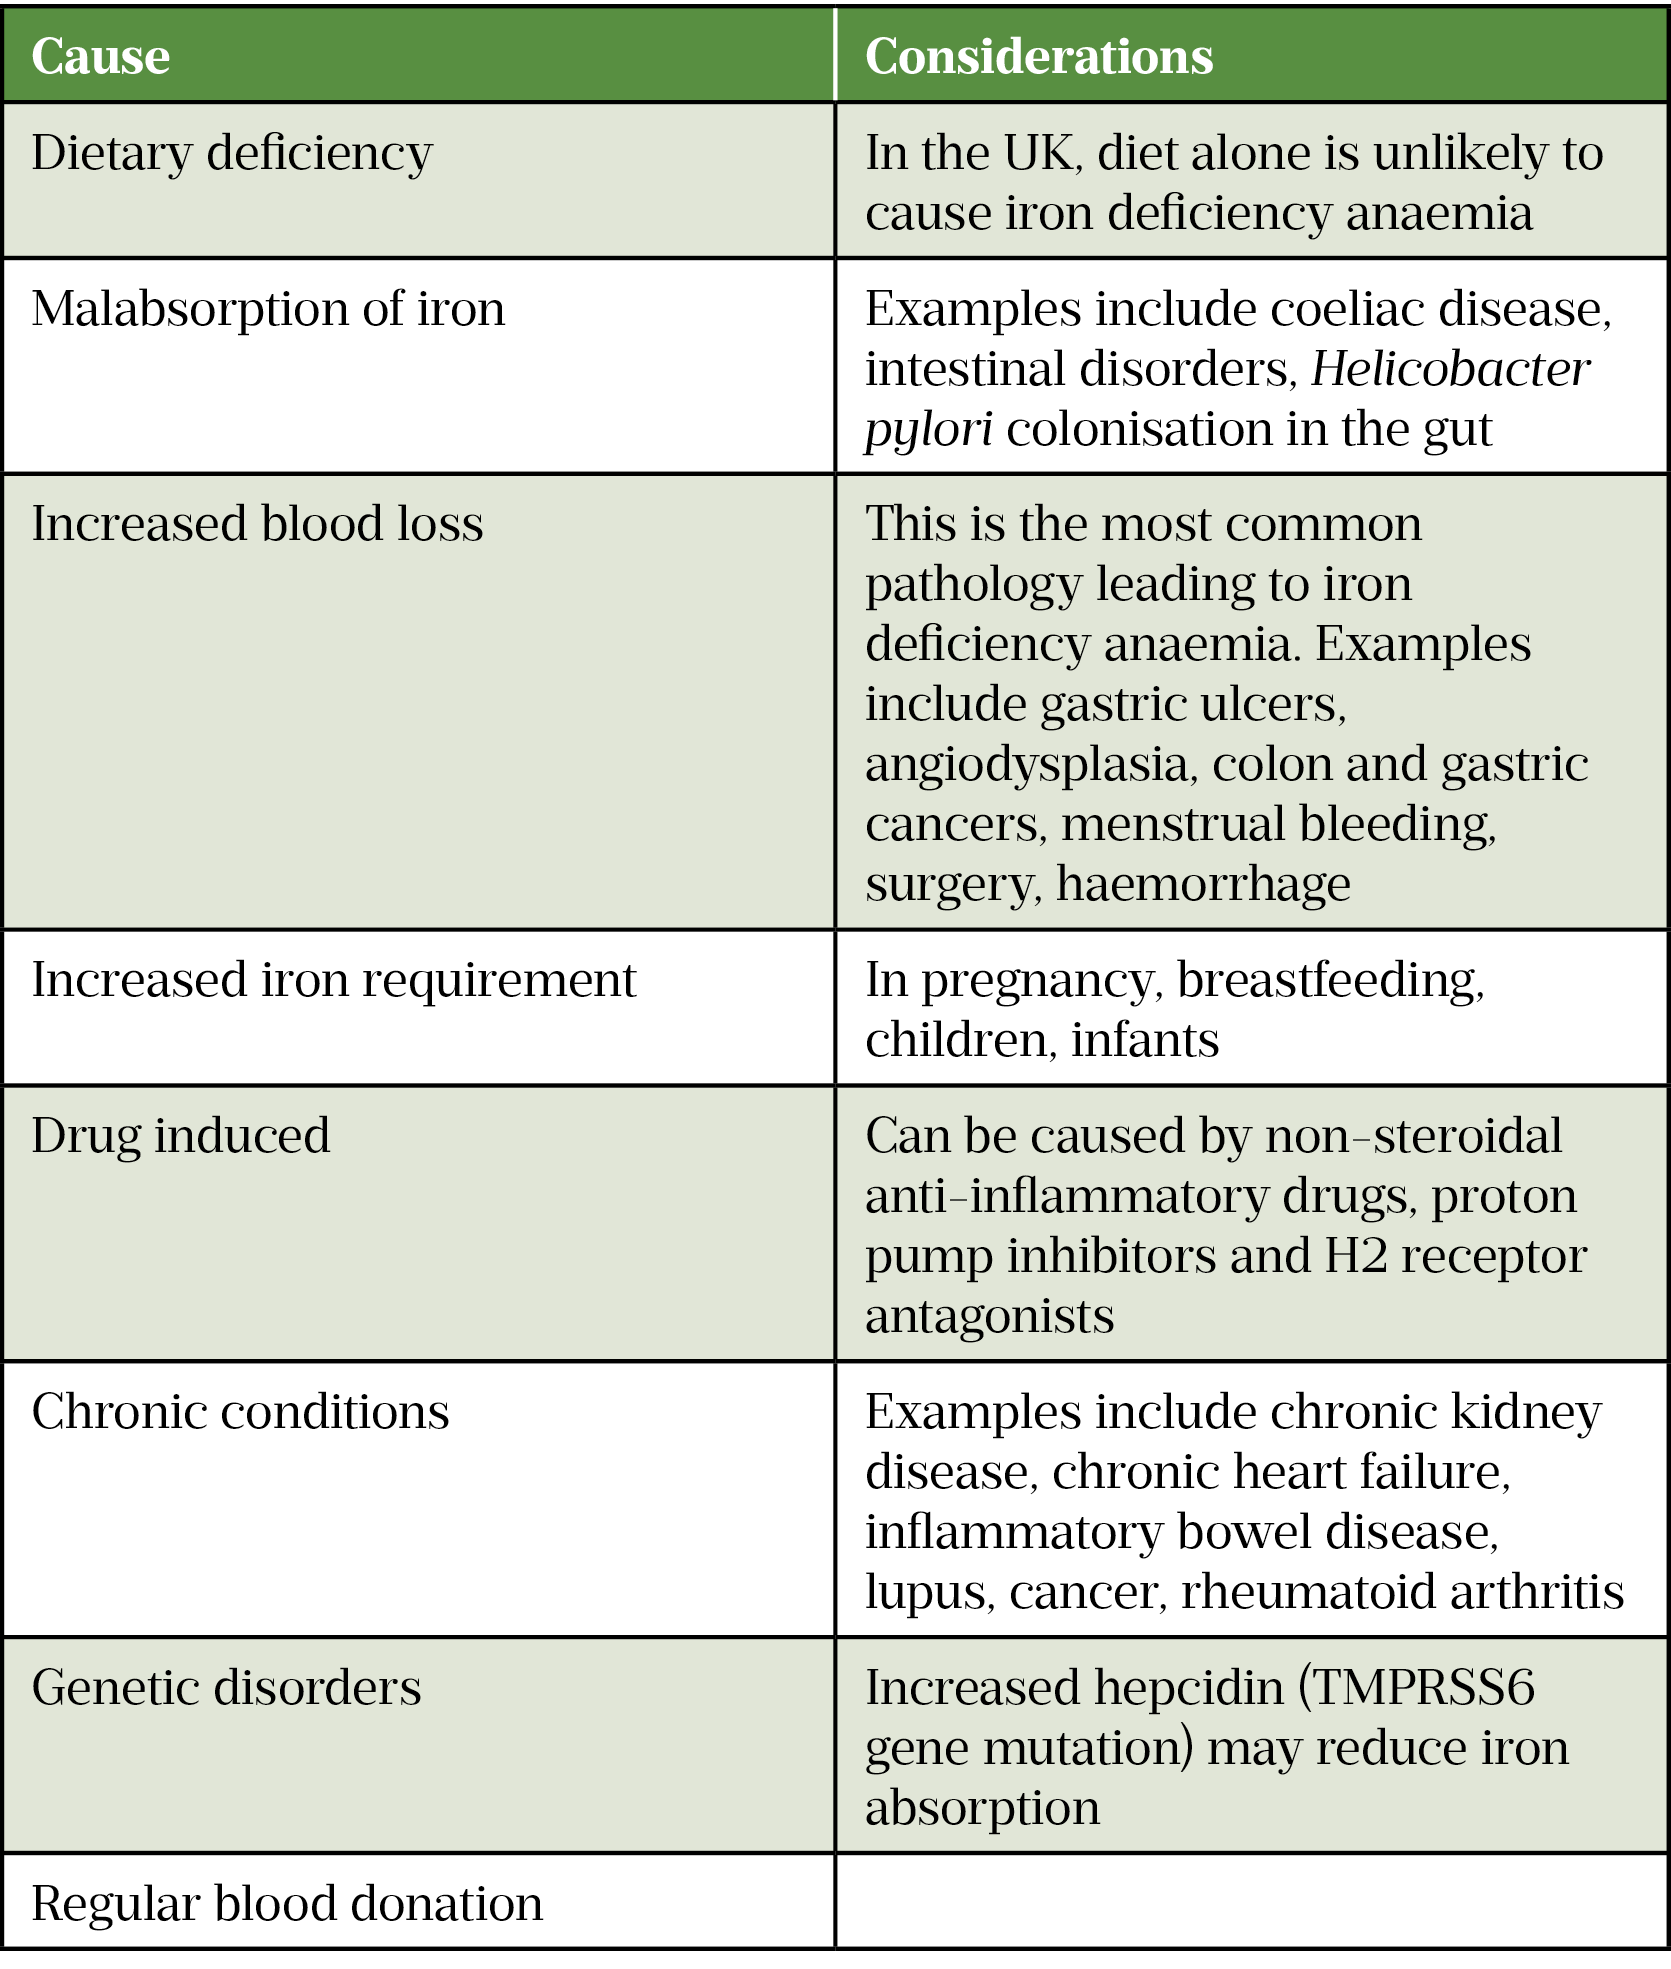 Table 2: Causes of iron deficiency anaemia